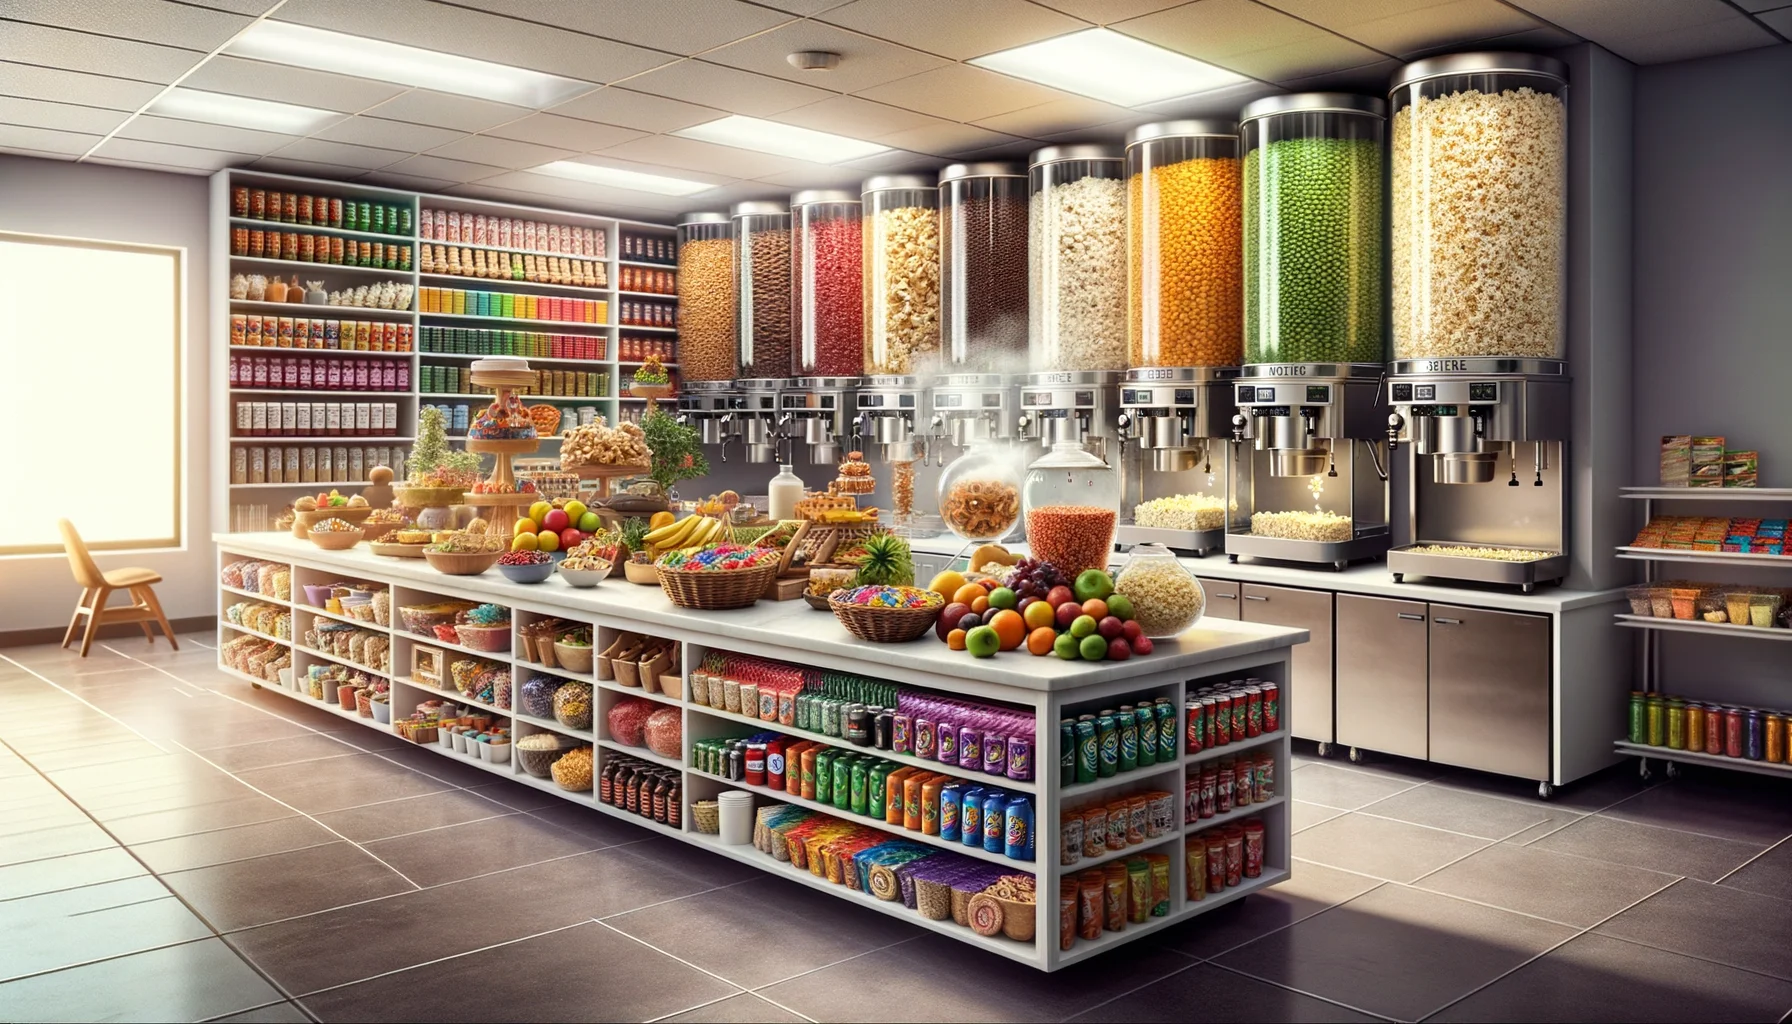 Imagine an amusing, realistic setting of an office snack corner that everyone dreams of. The picture showcases an array of mouth-watering snacks artfully arranged on a massive, sparkling clean counter. There are baskets overflowing with fresh fruits and a transparent jar brimming with rainbow-colored candies. A popcorn machine is busily popping, dispensing an aromatic, buttery fog. A coffee machine whirs next to an elaborate tea selection. A refrigerator door is slightly ajar, revealing rows of neatly arranged energy drinks, bottled green tea, and fruit-infused water. In the background, there is an endless supply of well-stocked cupboards full of dried fruit, protein bars, and nutritious trail mix packets.